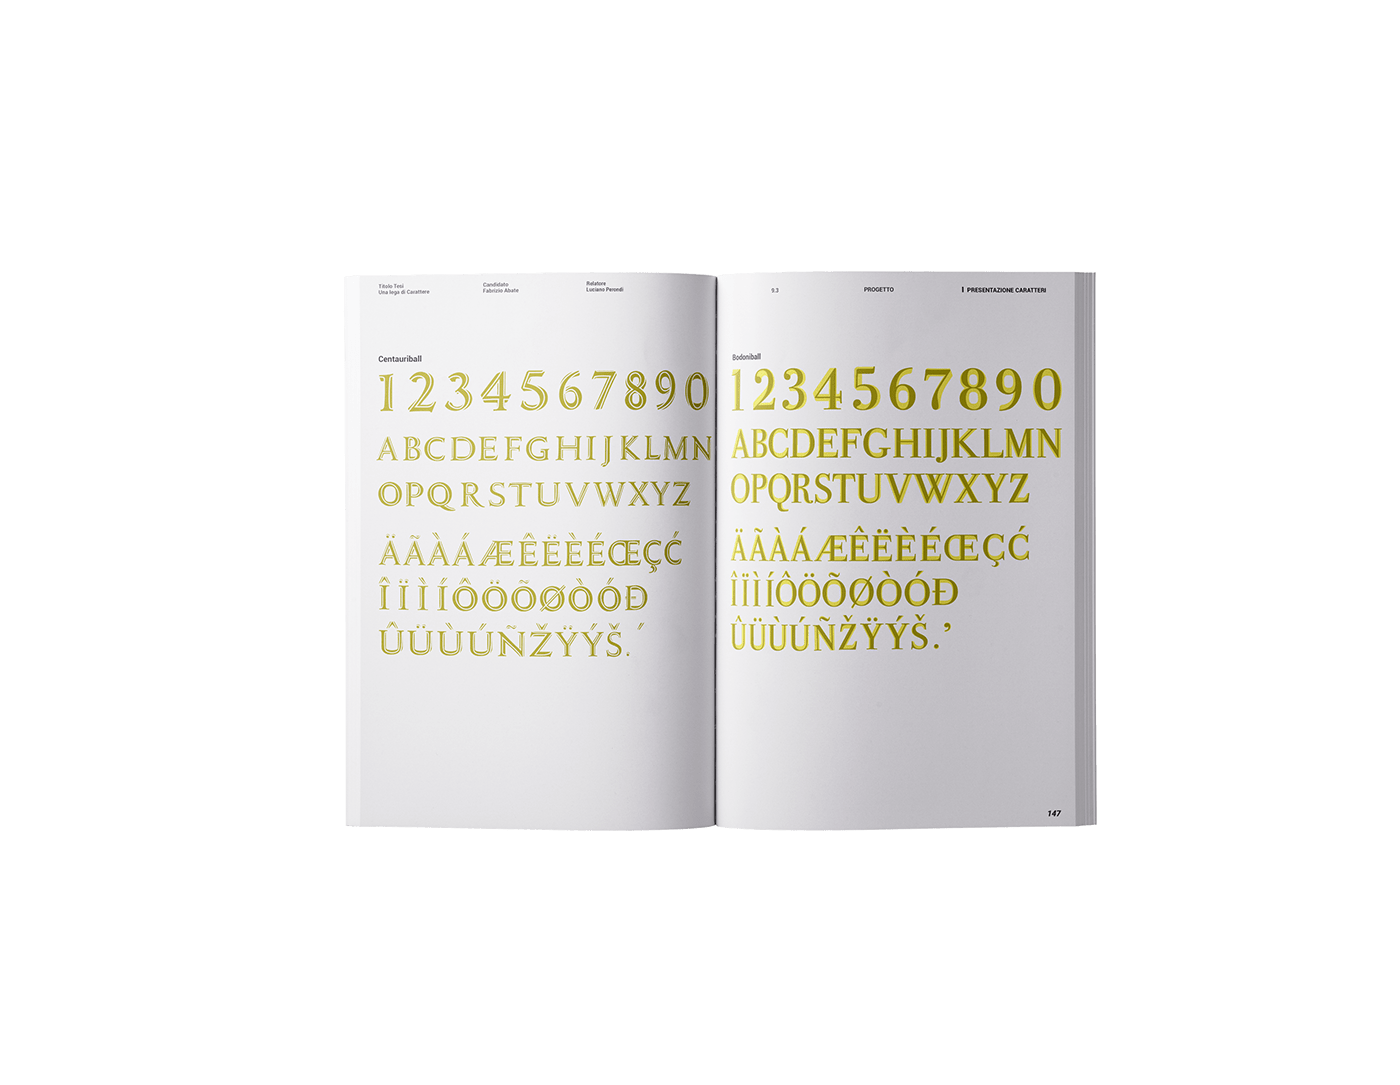 Image may contain: typography, book and screenshot